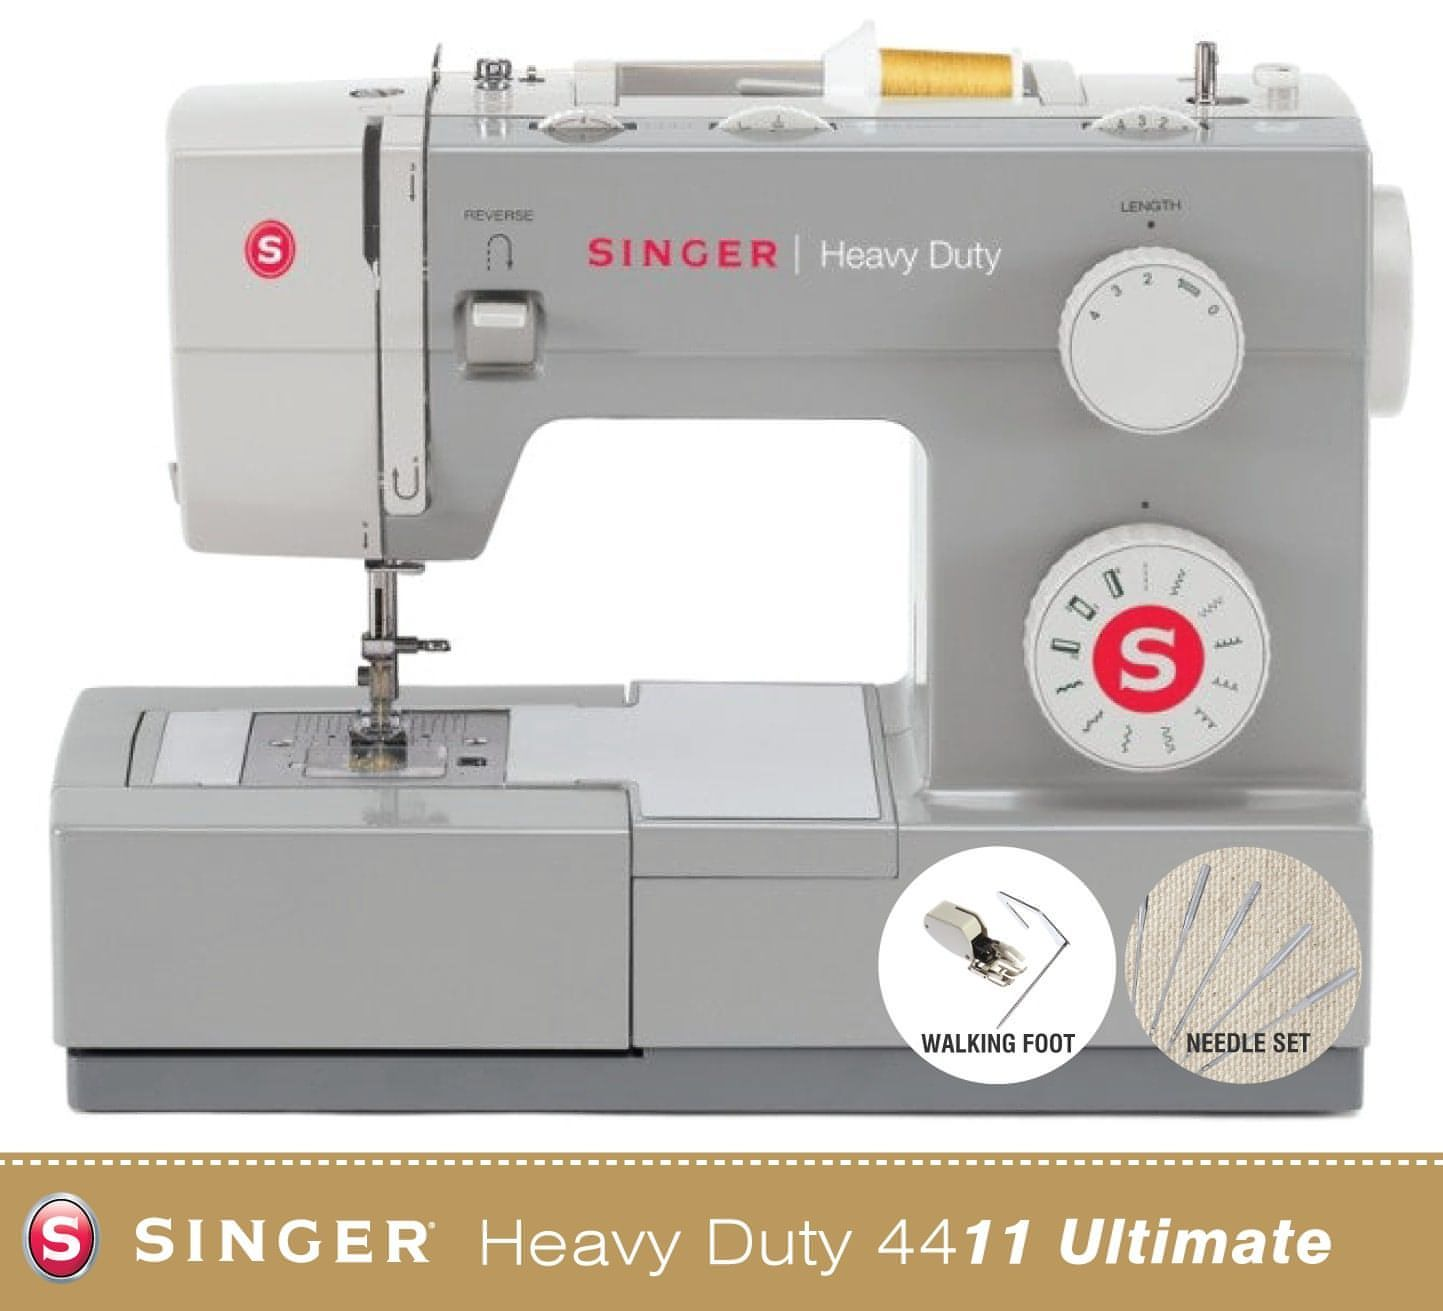 Singer Heavy Duty 4411 Sewing Machine Ultimate Edition - Includes Even Feed Walking Foot and Heavy Duty Needle Pack